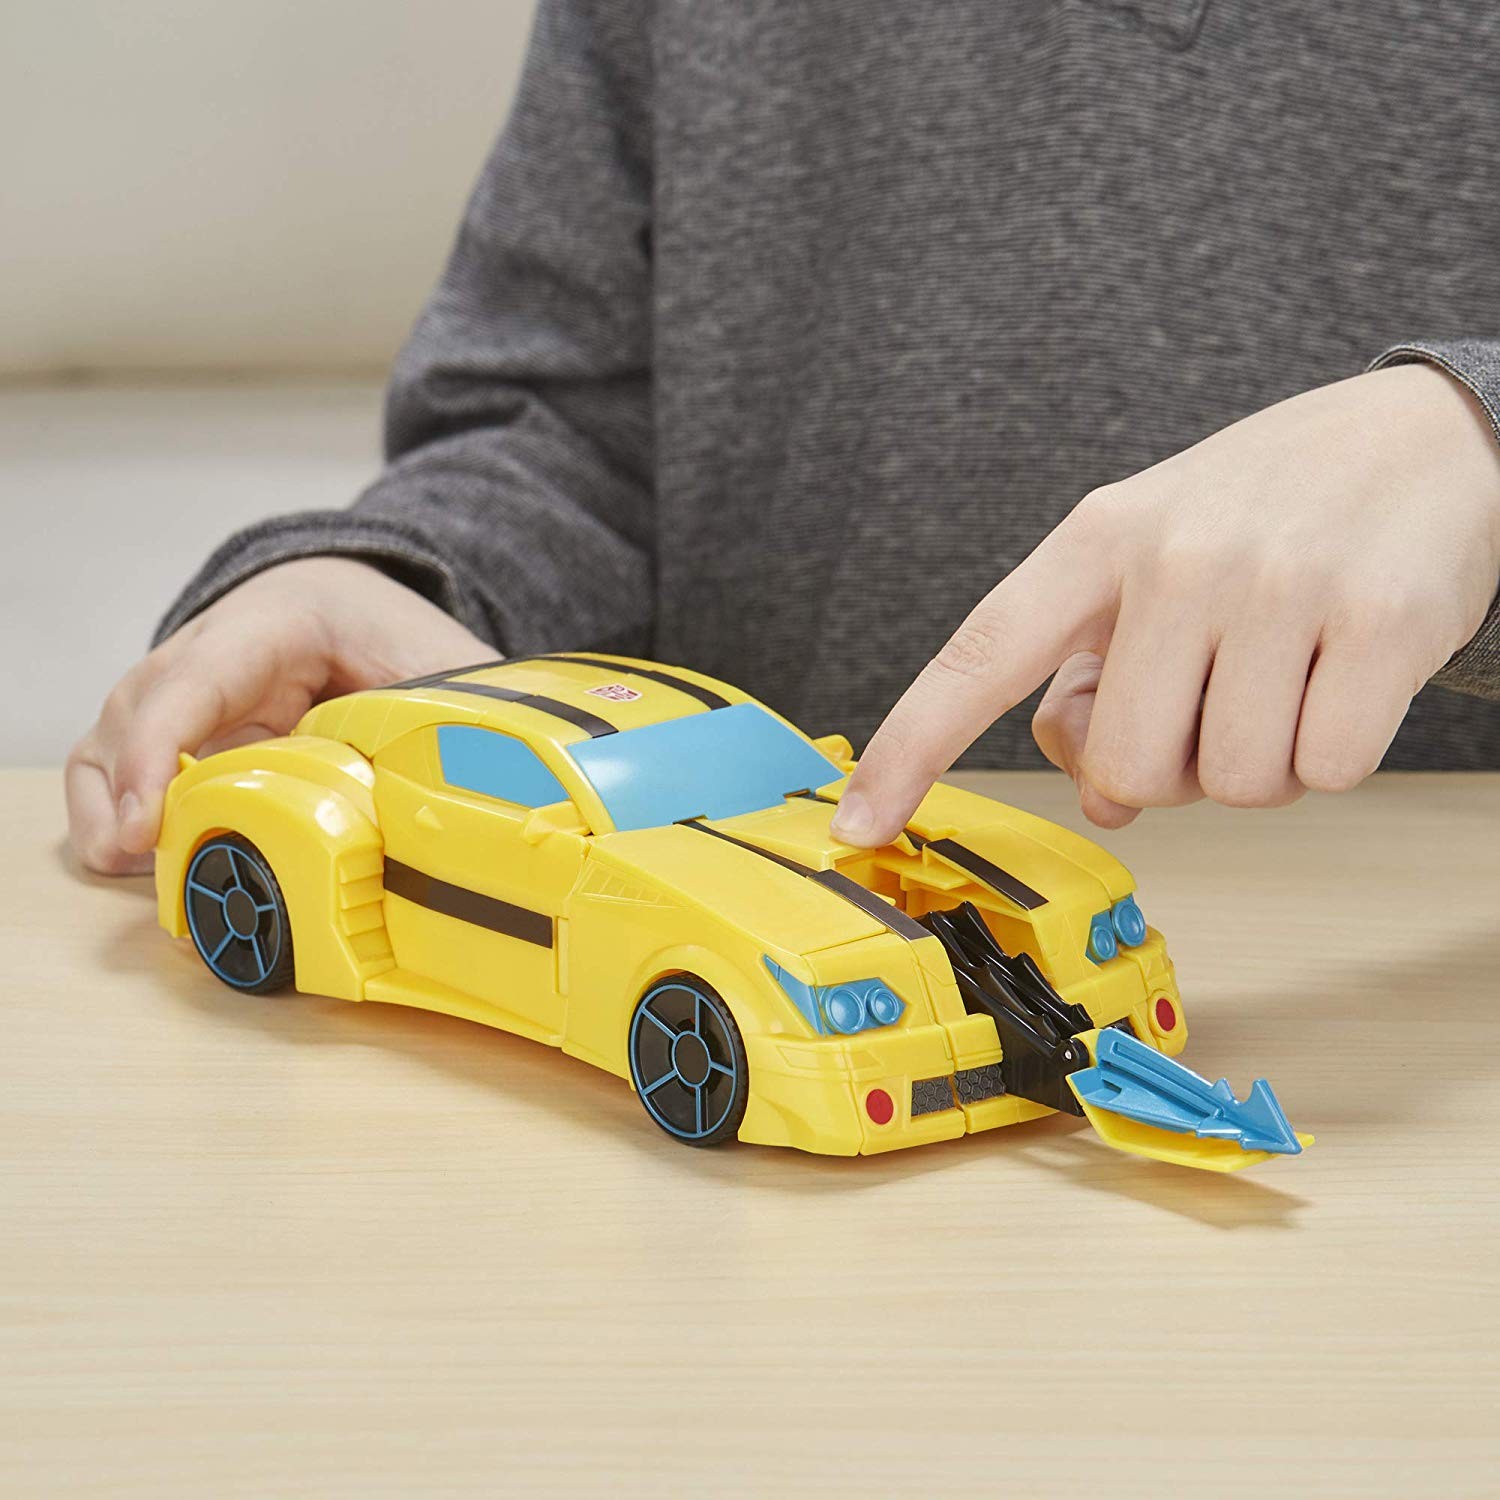 Transformers News: Transformers Cyberverse Action Attackers Ultimate Class Bumblebee Now In Stock At Amazon.com